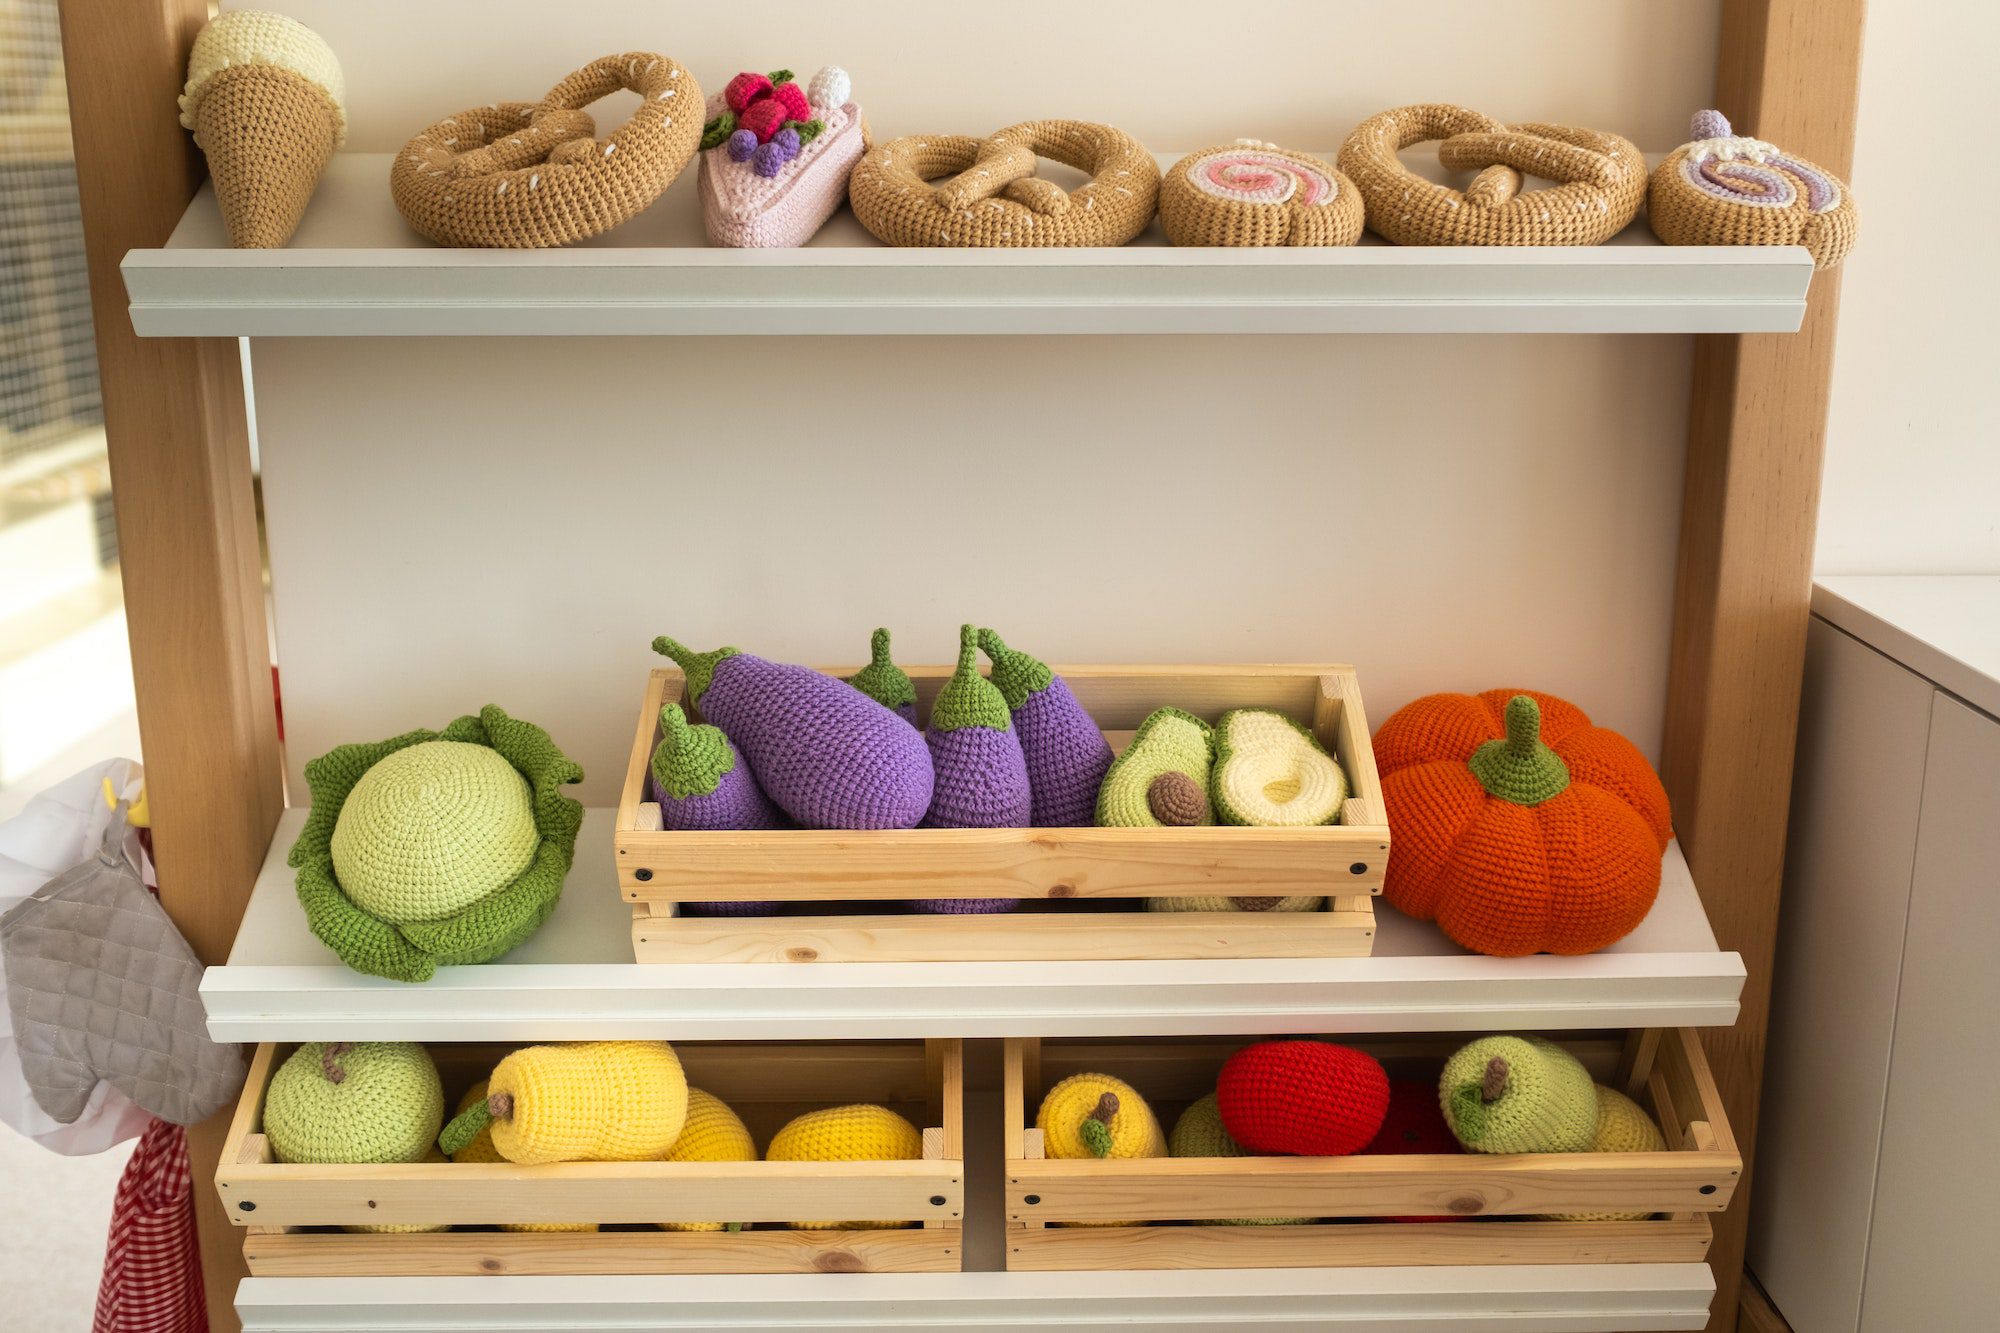 Artificial food in the children's kitchen. On the shelf are vegetables and fruits made of